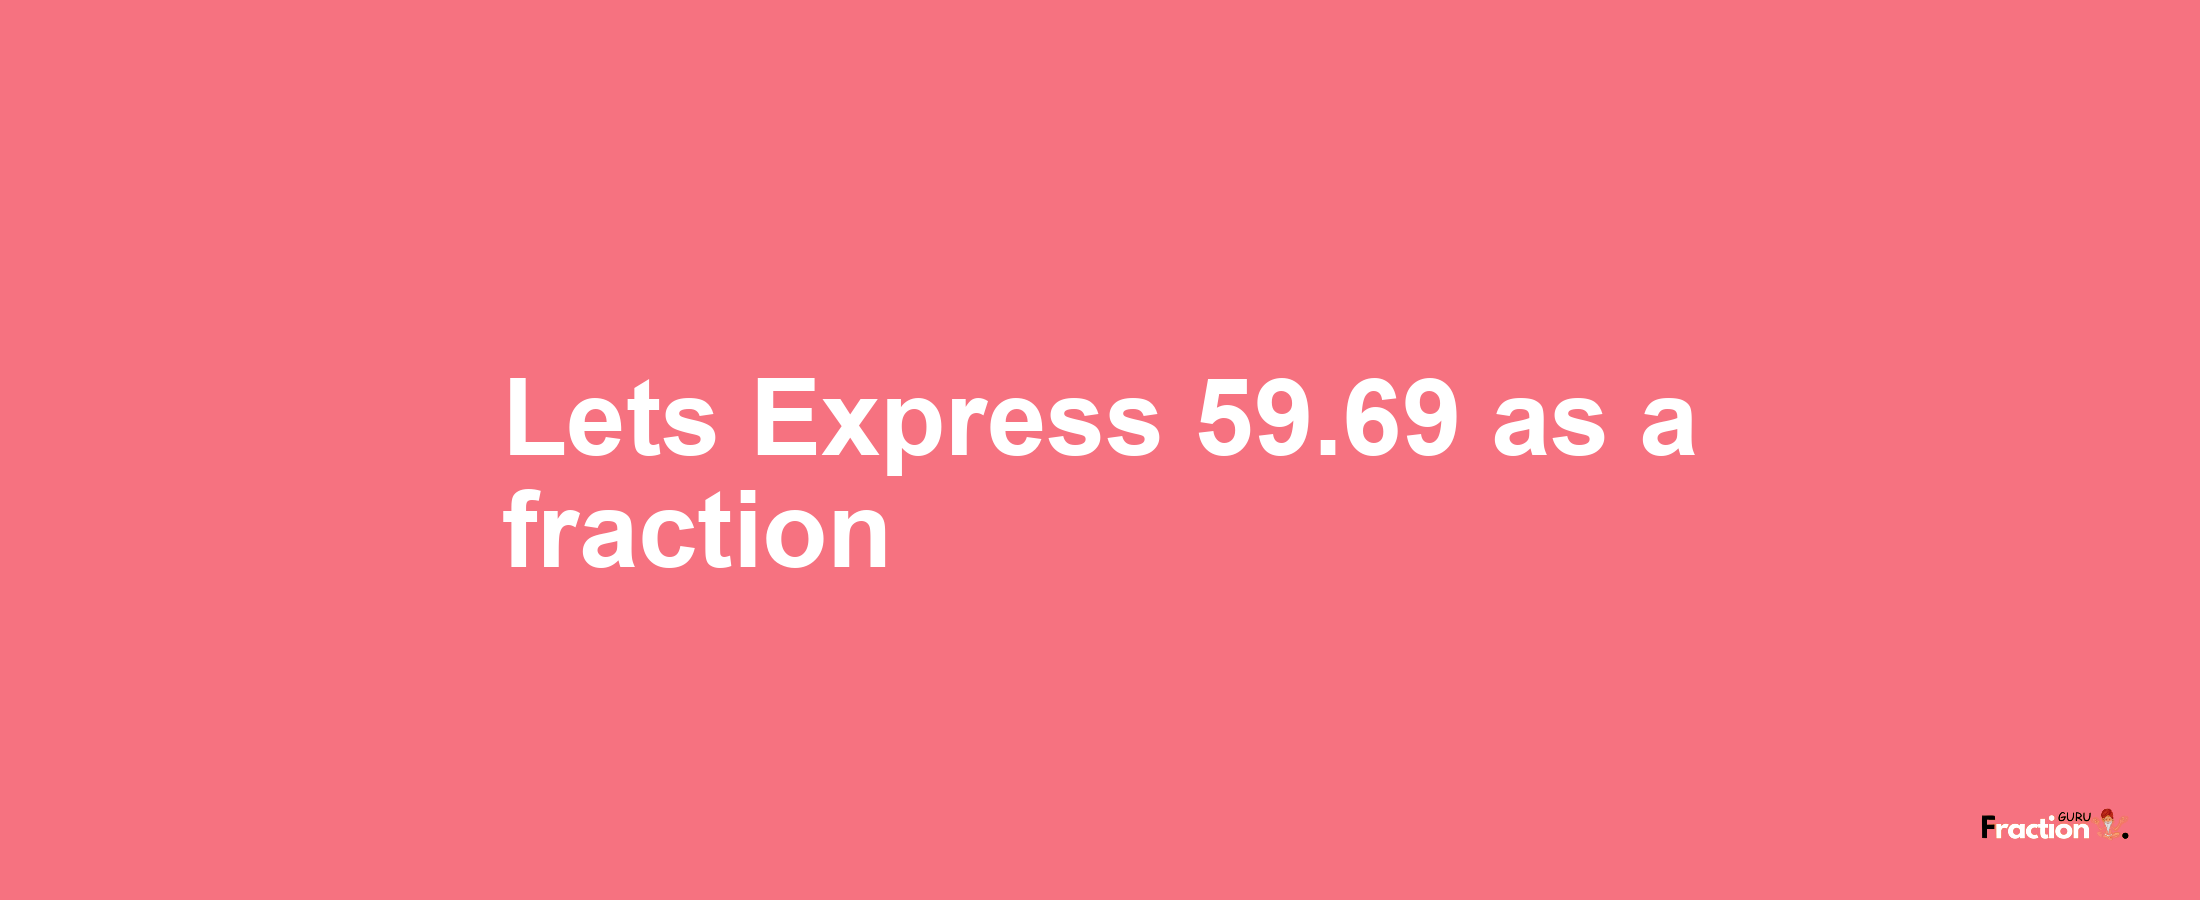 Lets Express 59.69 as afraction